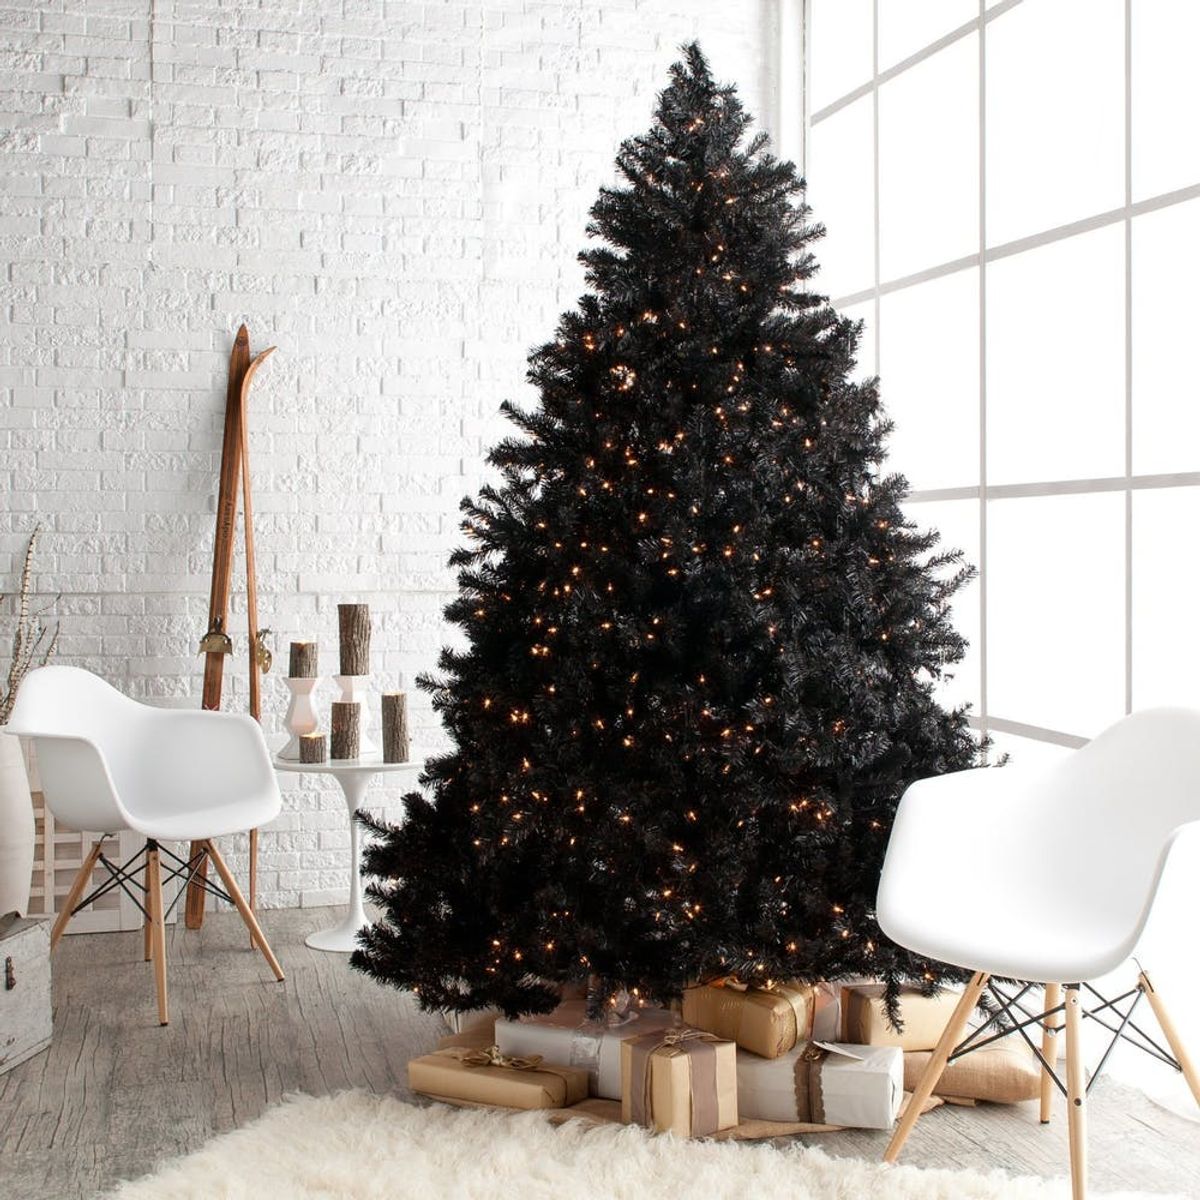 Black Christmas Trees Are a Thing (and They’re Not As Goth As You Think)